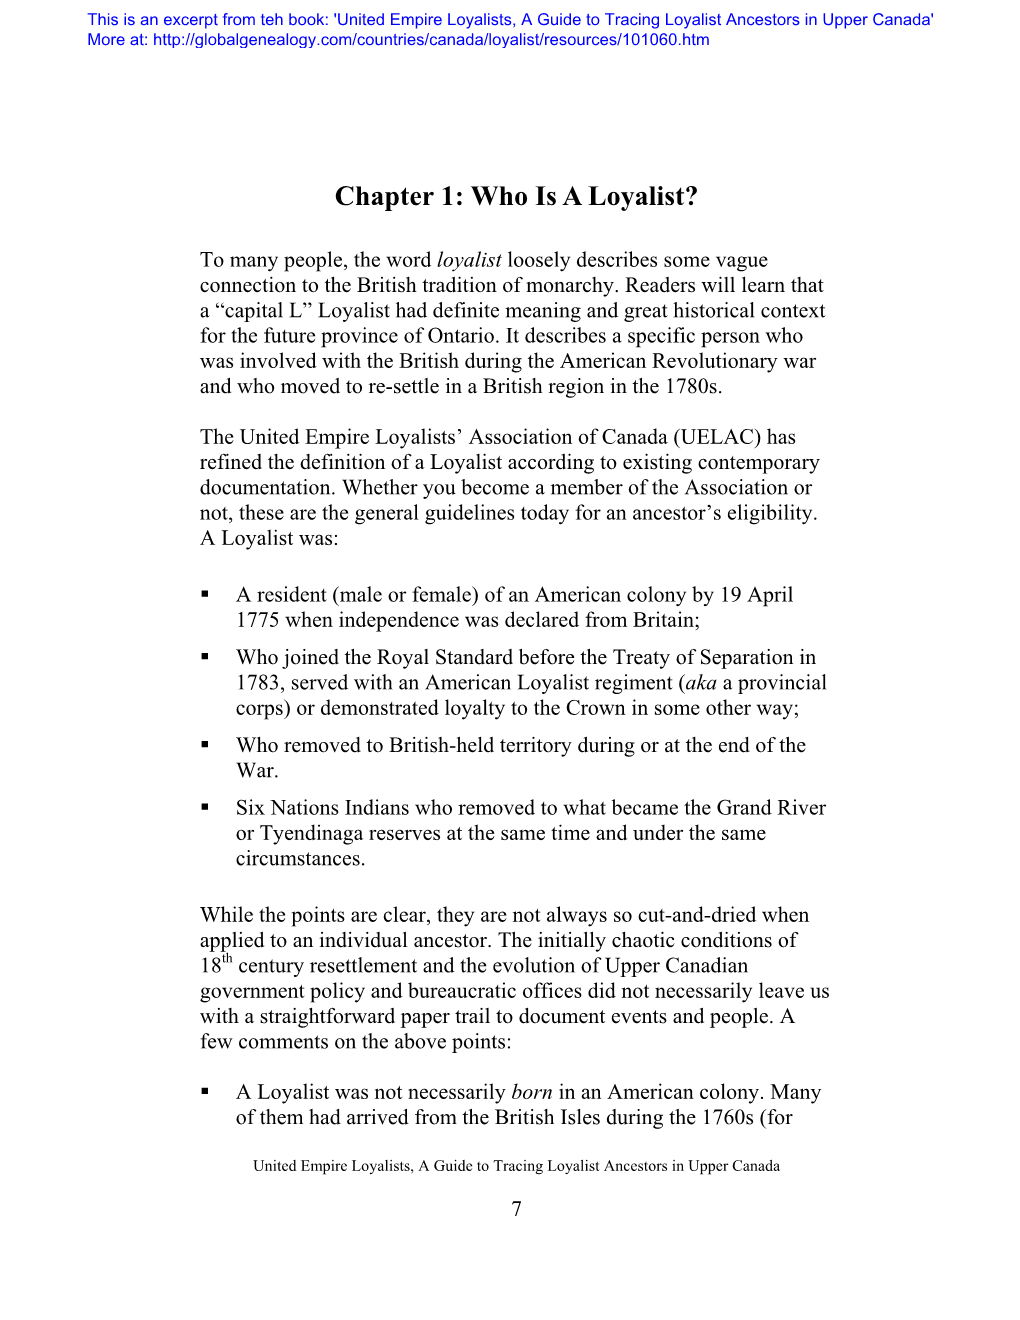 Who Is a Loyalist? Chapter 1: Who Is a Loyalist?